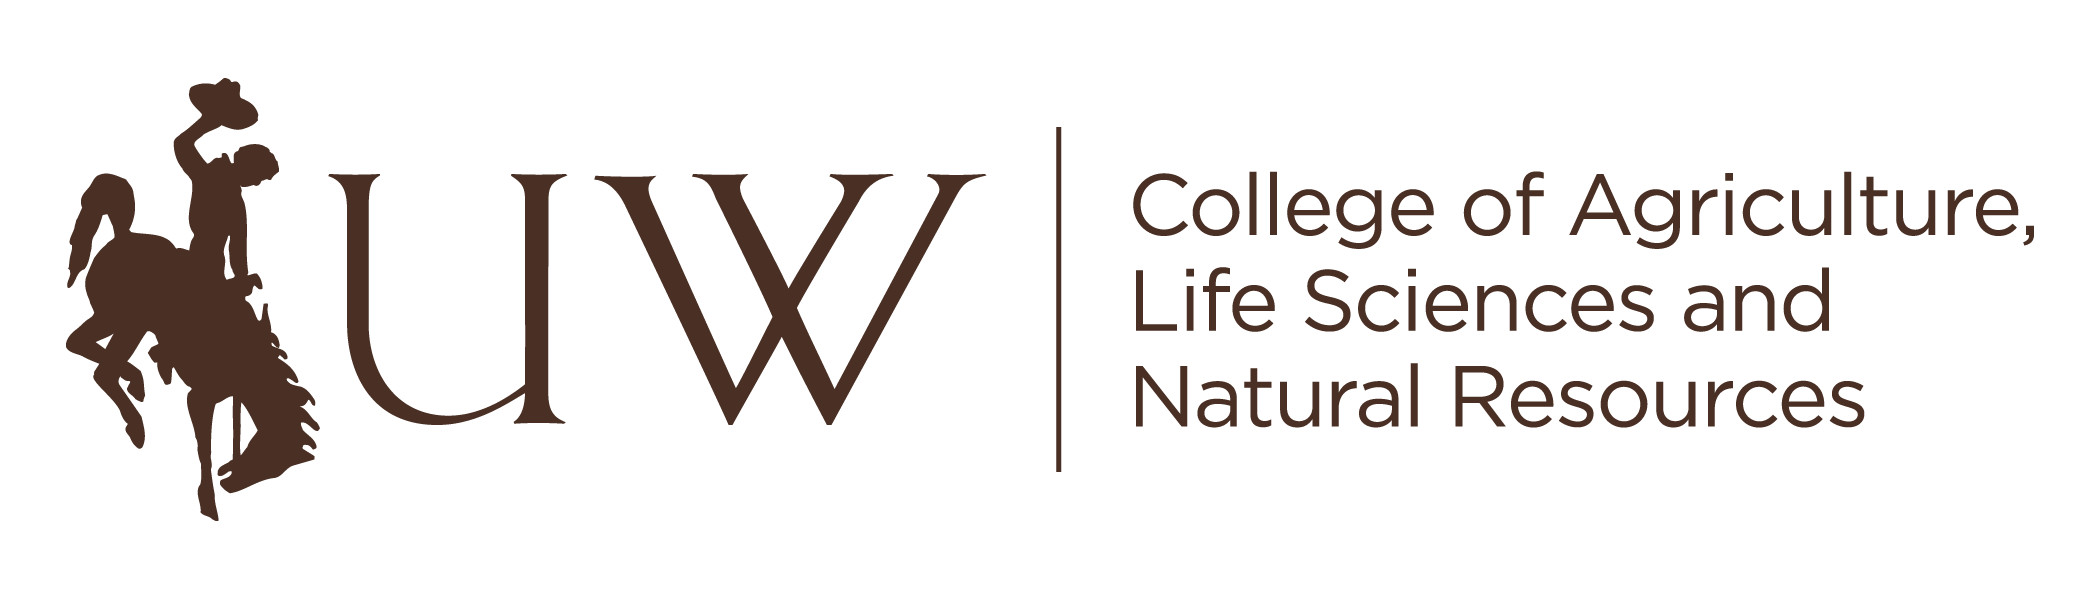 University of Wyoming College of Agriculture, Life Sciences and Natural Resources